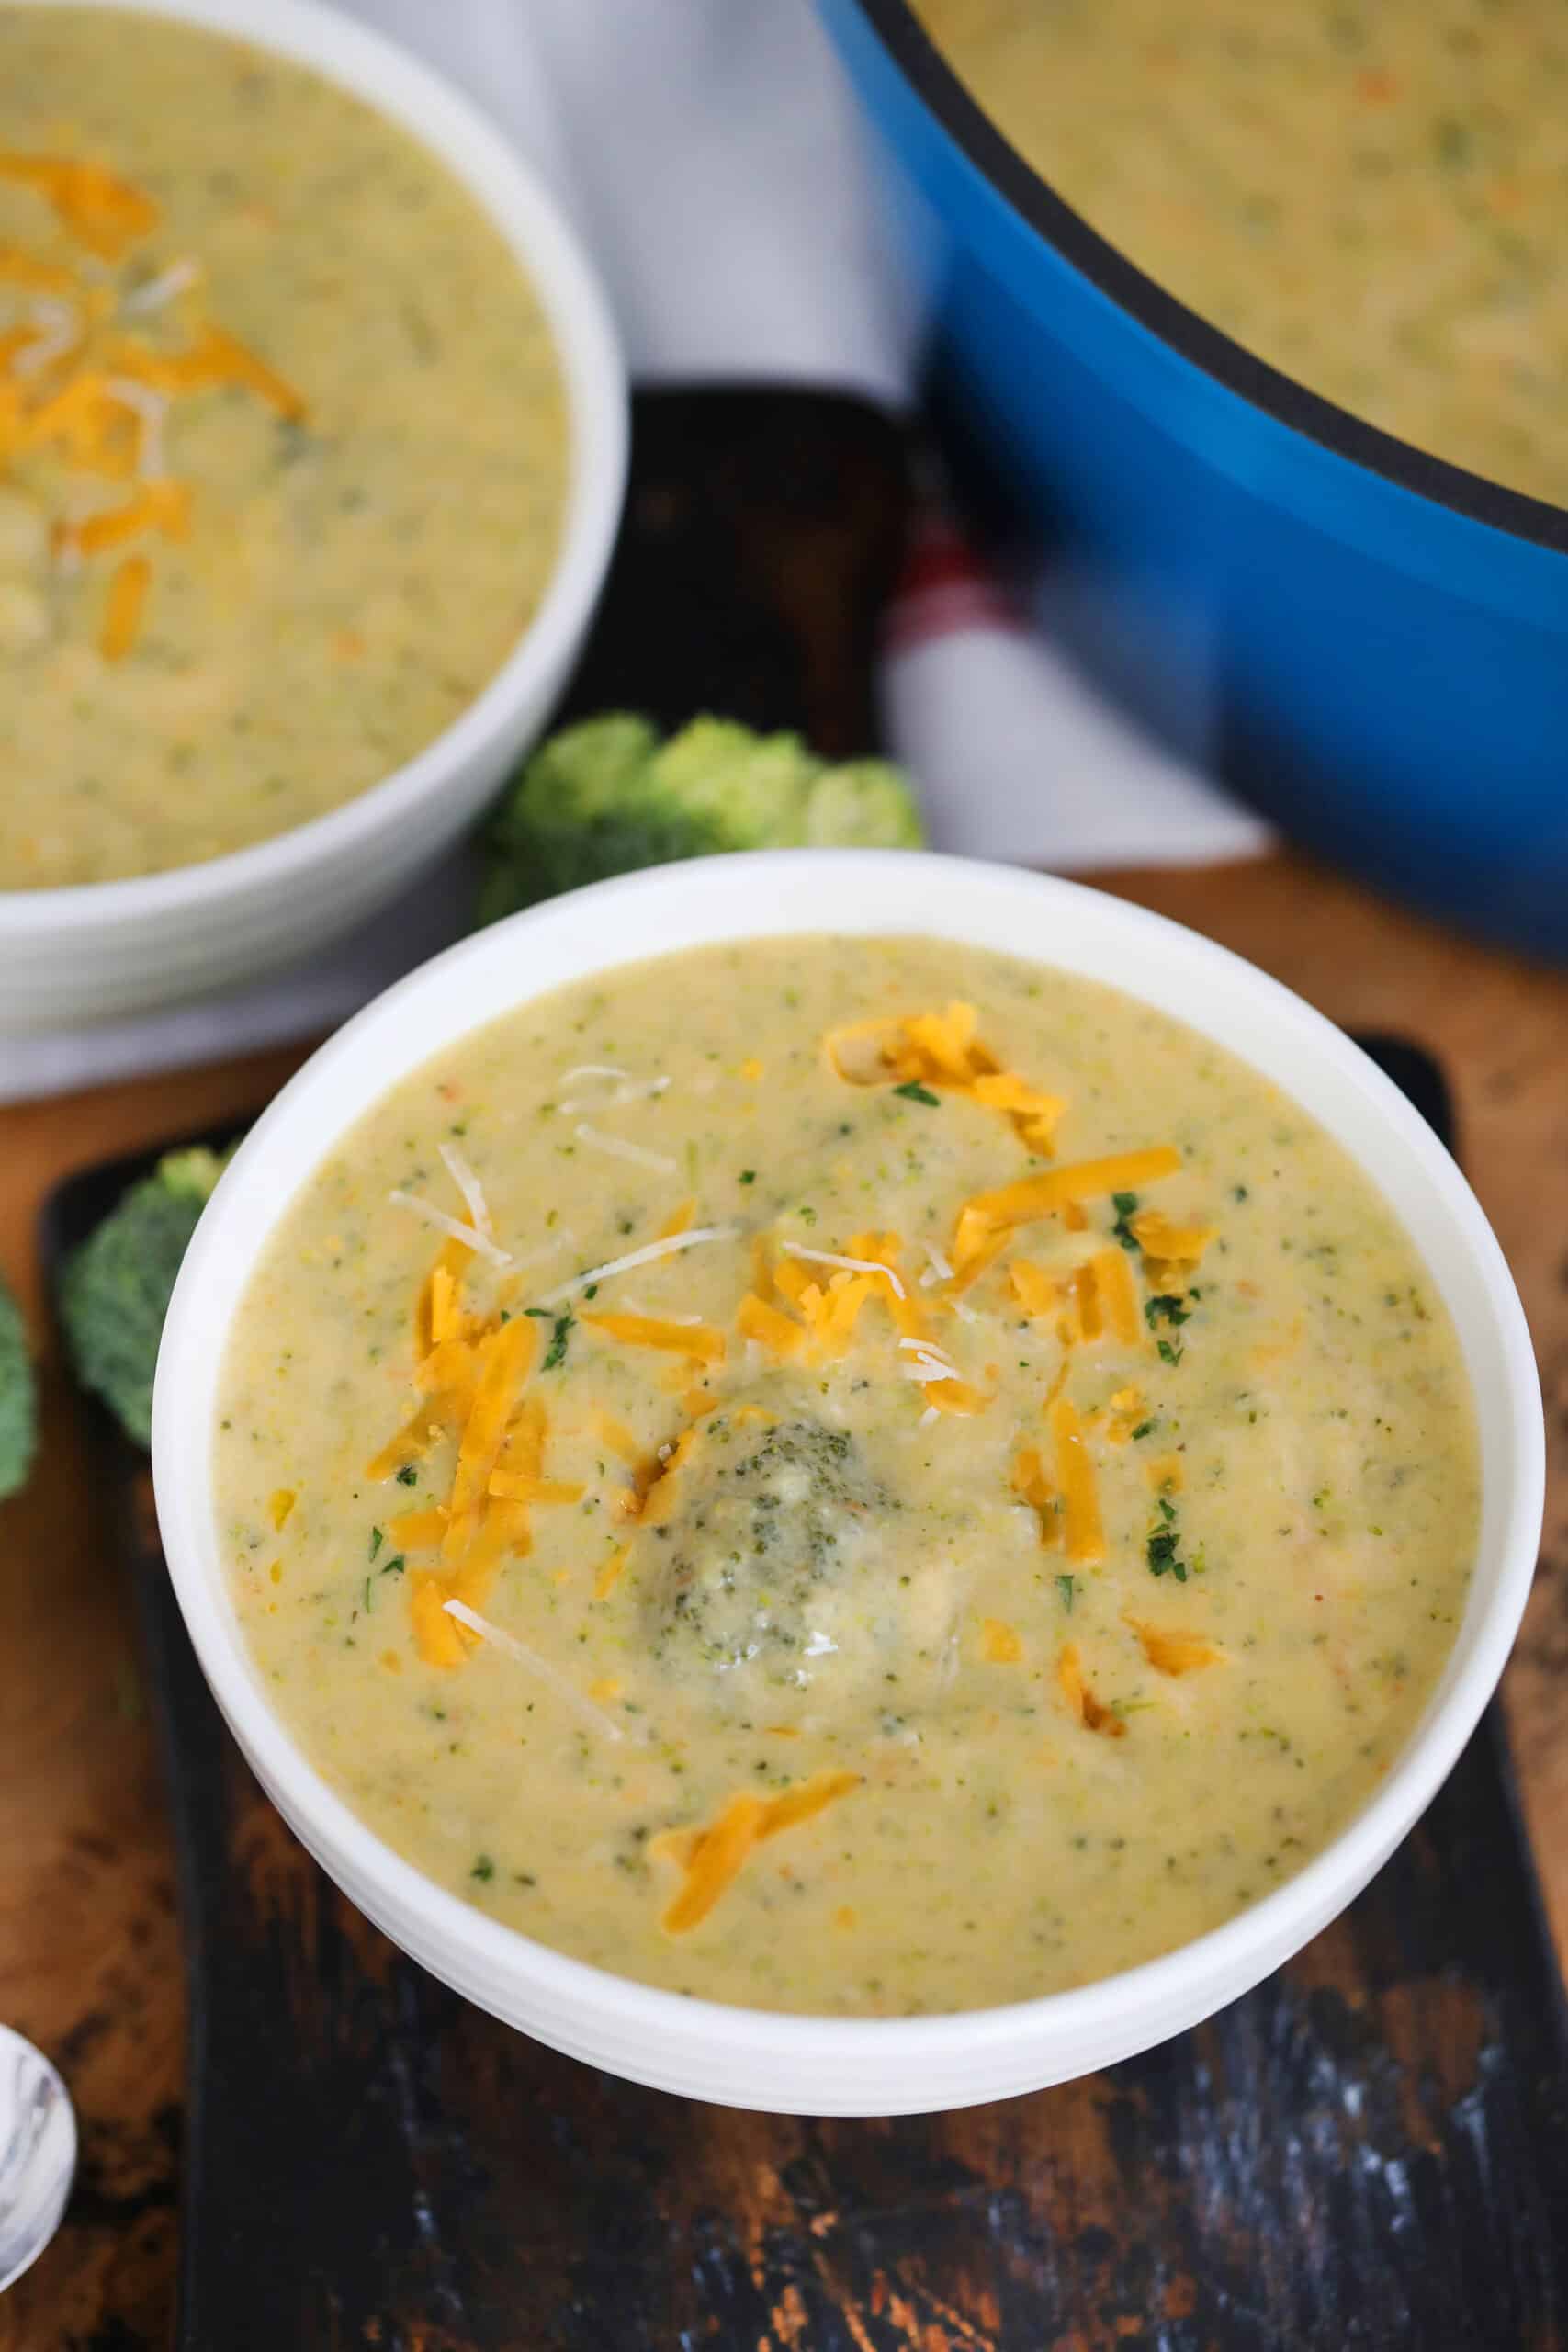 Broccoli Soup in white bowls garnished with shredded cheddar